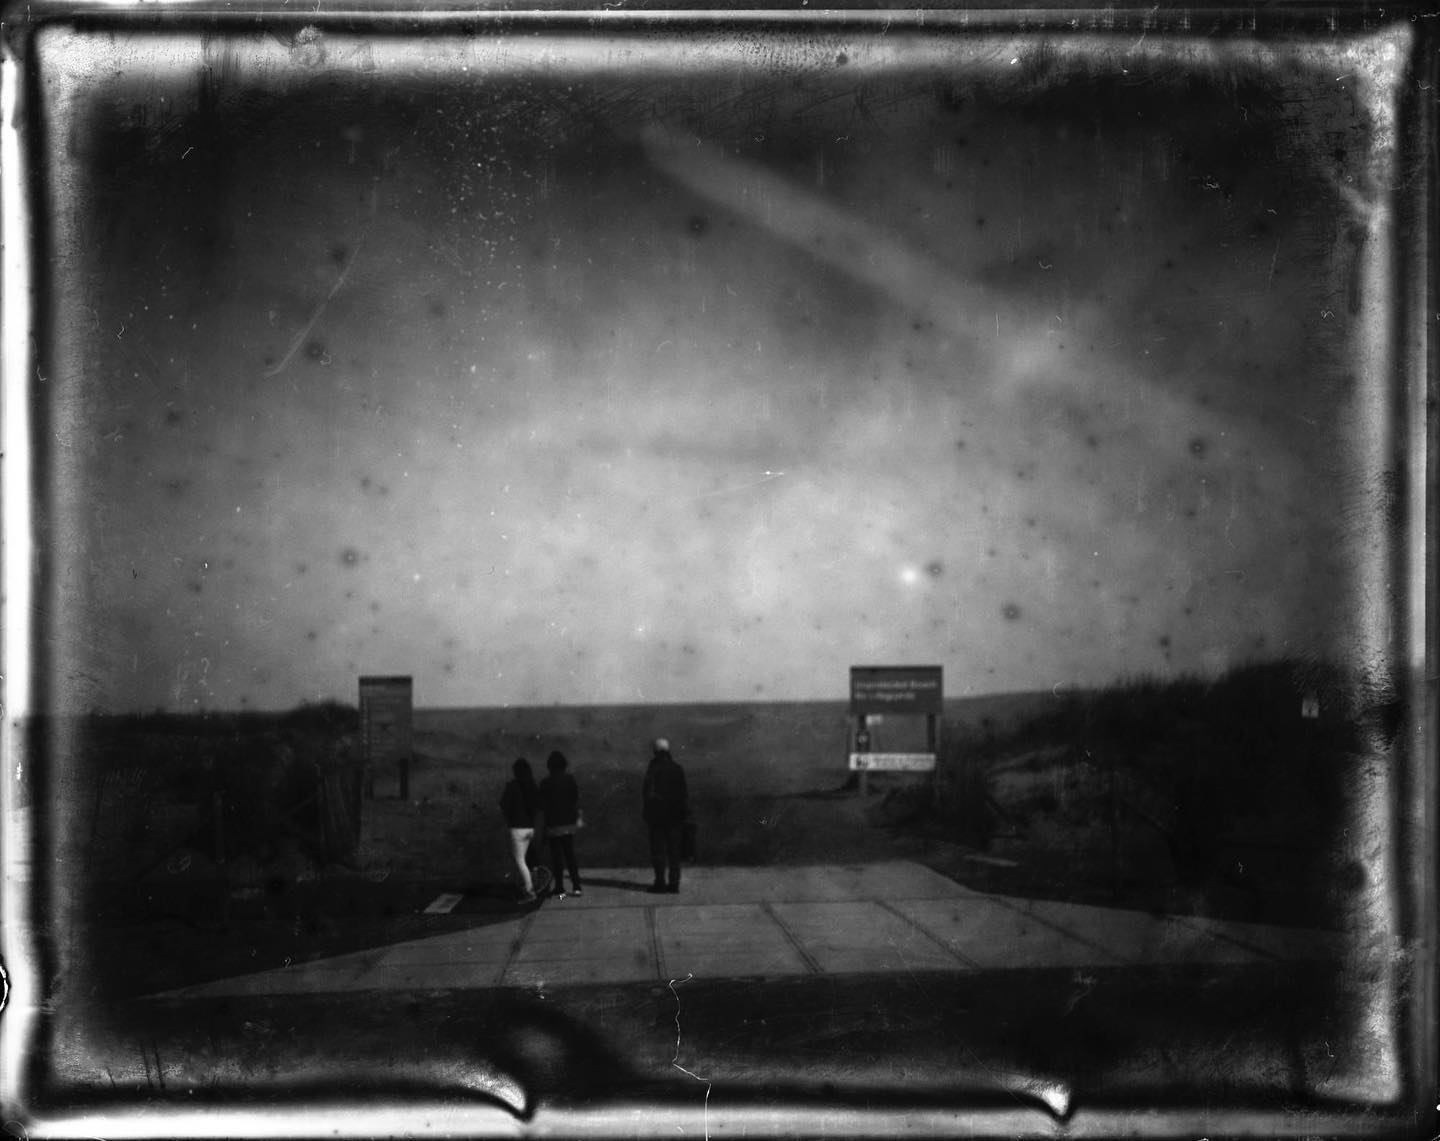 Unprotected Beach. No Swimming.

Another J. Lane #dryplate shot last weekend at Gateway National Recreation Area â Sandy Hook, our local national park. I think my plate holders have some focus issues, like theyâre not holding the plate in the proper plane. One reason why I look forward to getting the new holders that @pictoriographica and @chromacamera did a Kickstarter for a few months ago.

#dryplatephotography #film #filmphotography #speedgraphic #convertedfilmpack